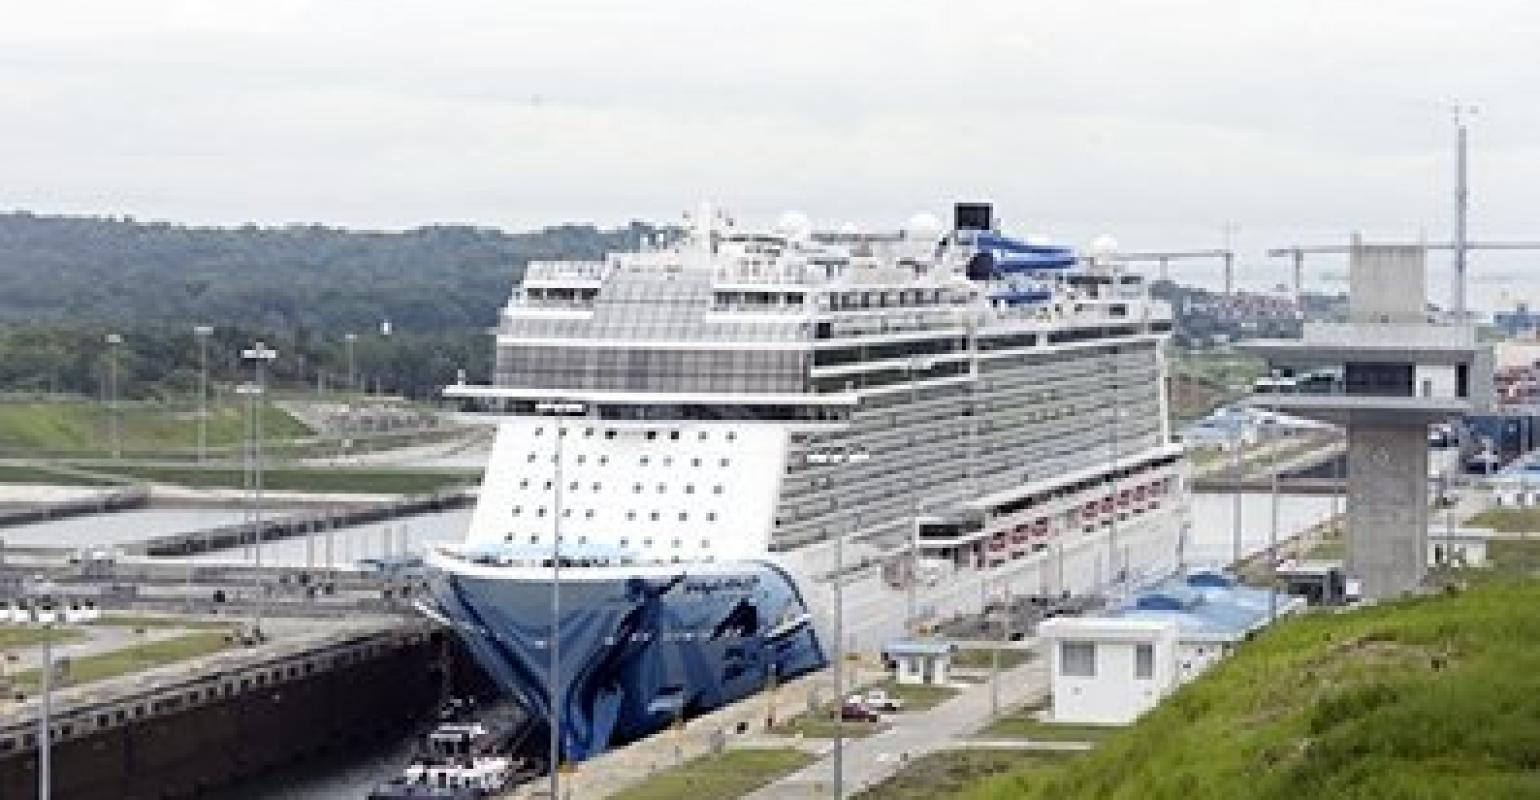 Over 230 cruise ships set to visit the Panama Canal in 2018/19